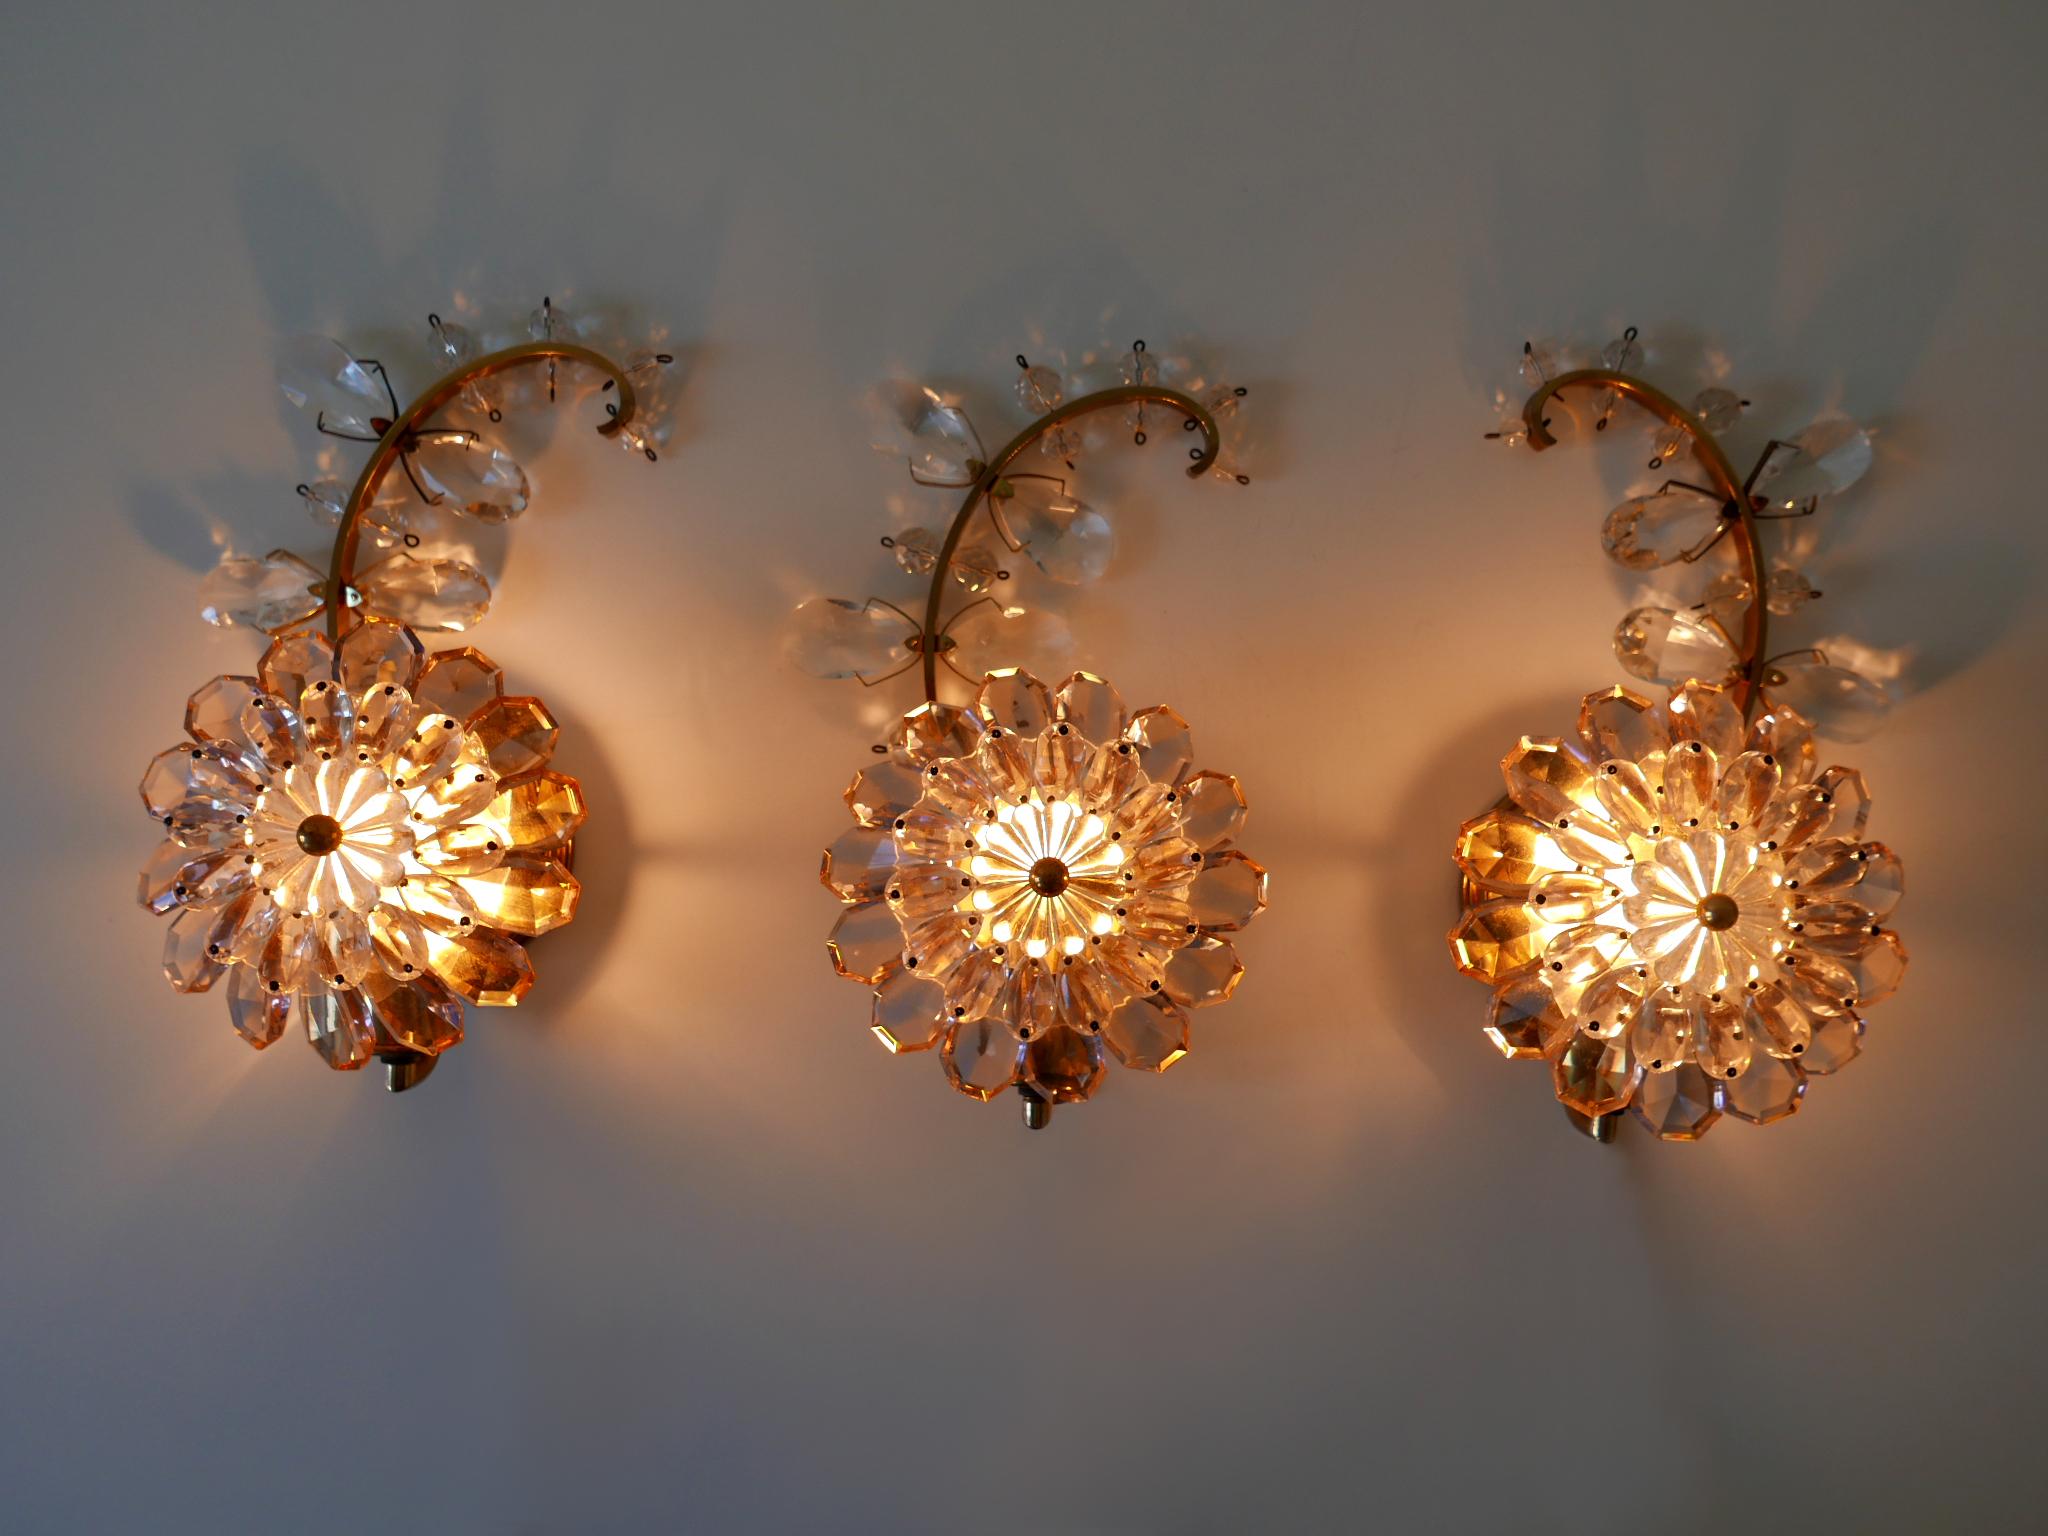 Exceptional set of three highly decorative and beautiful Mid-Century Modern iridescent crystal glass and brass flower sconces or wall lamps. Manufactured by Palwa, 1960s, Germany.

Executed in iridescent crystal glass and polished brass, each lamp